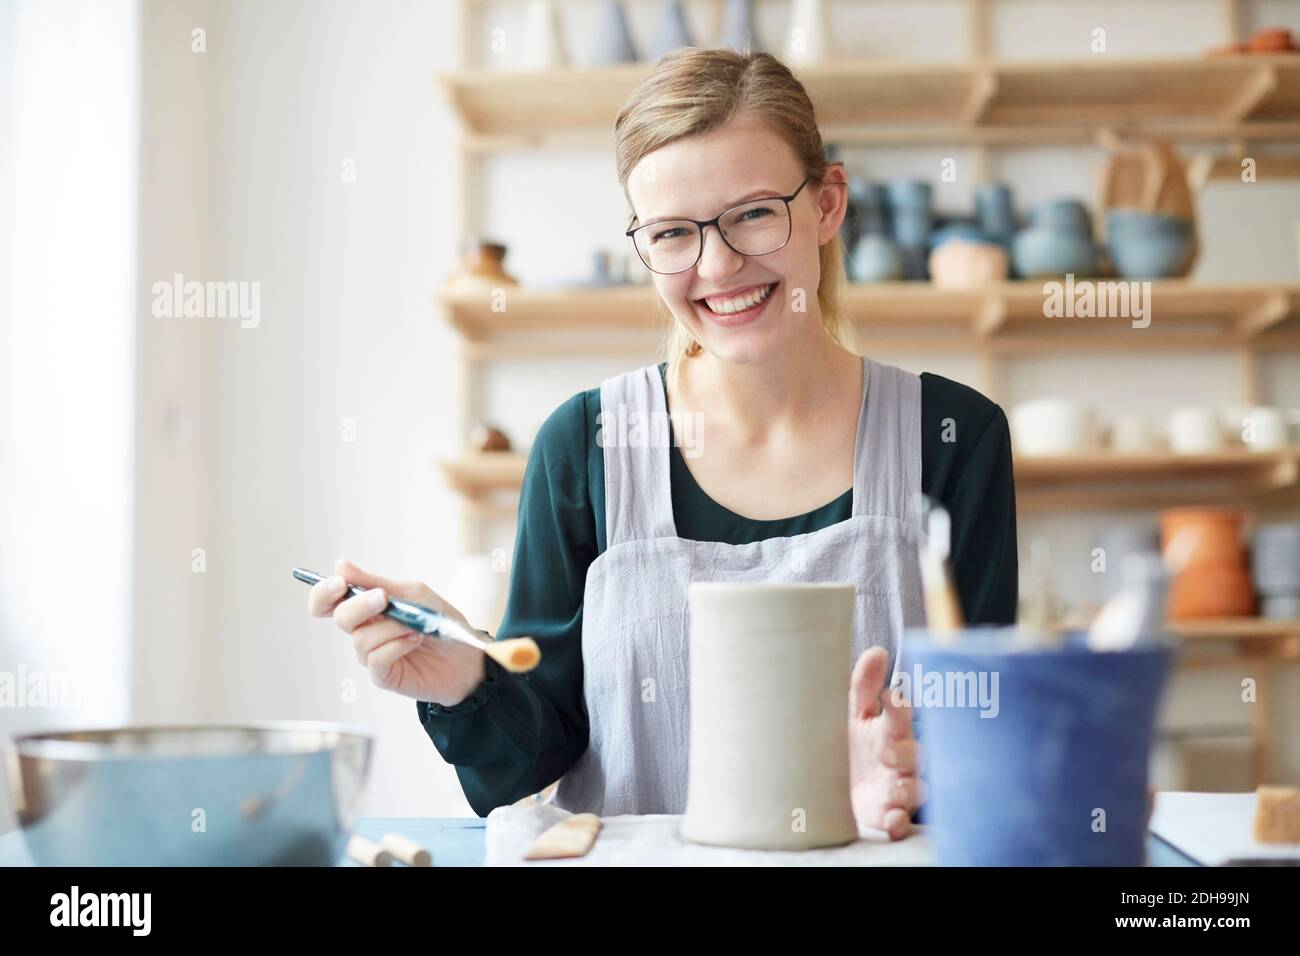 Portrait of smiling young woman learning pottery in art studio Stock Photo